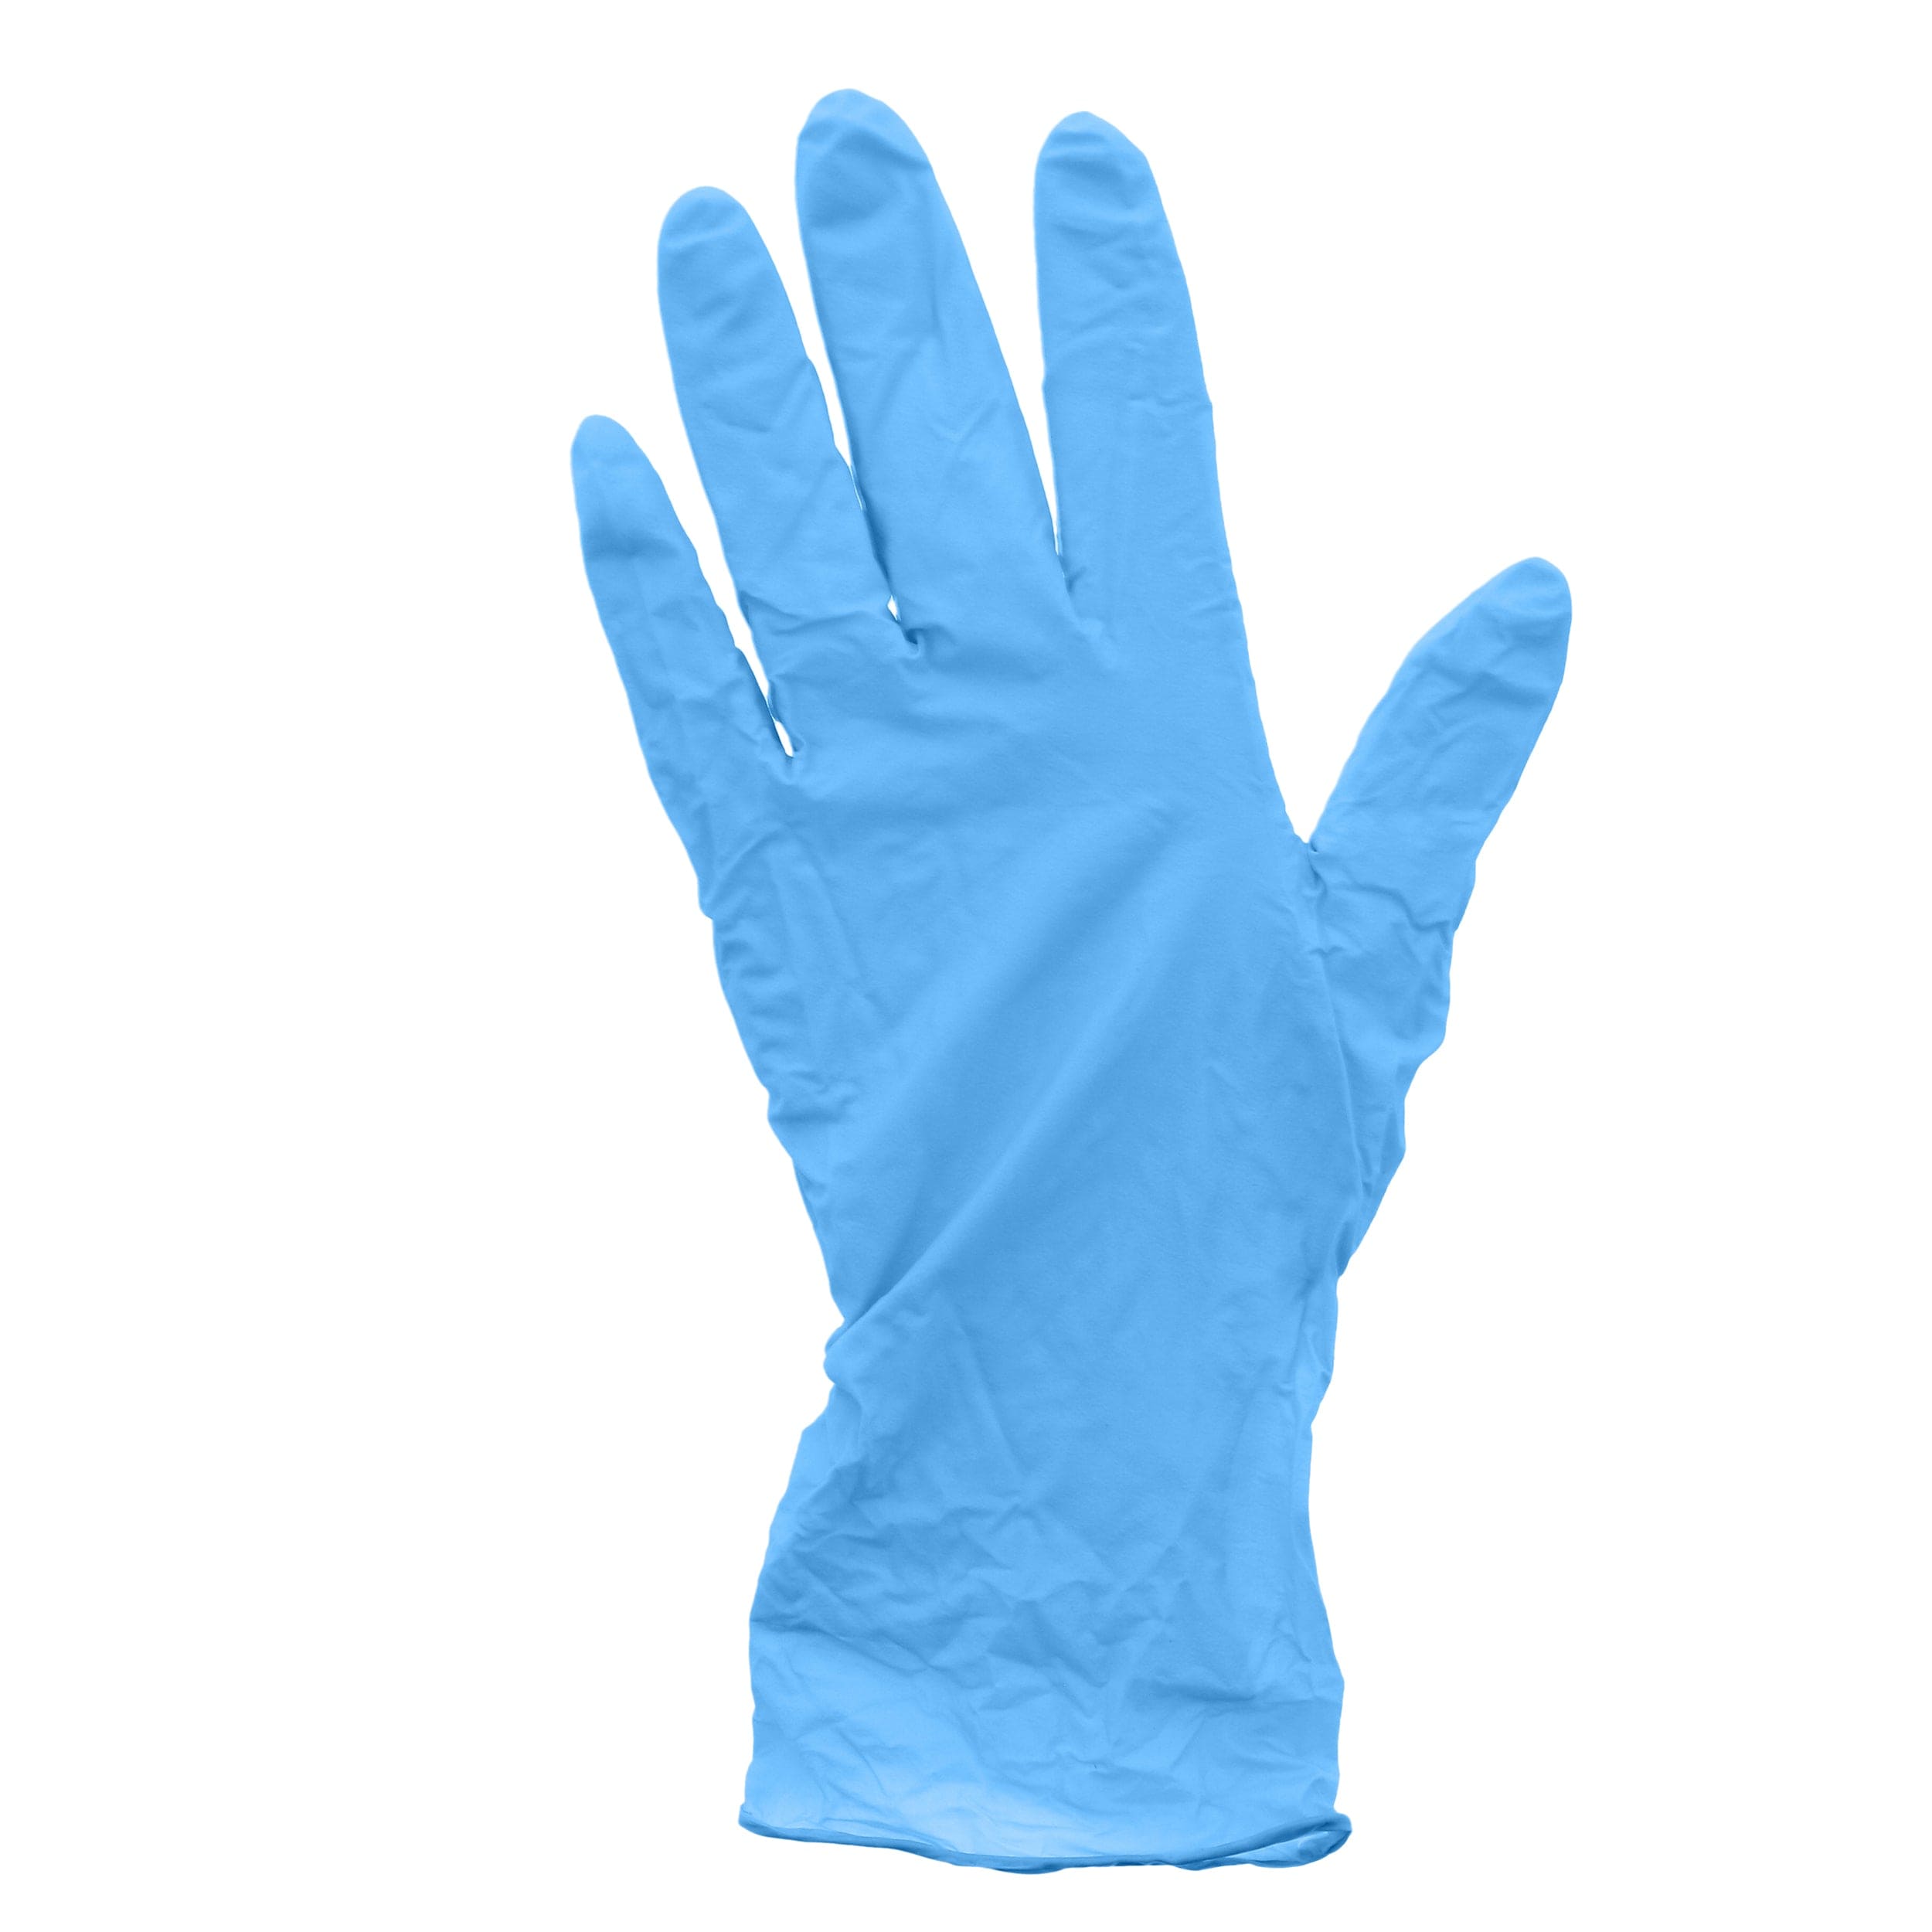 Pacific Powder Free Nitrile Gloves, Case of 1,000 (XXL: 900)